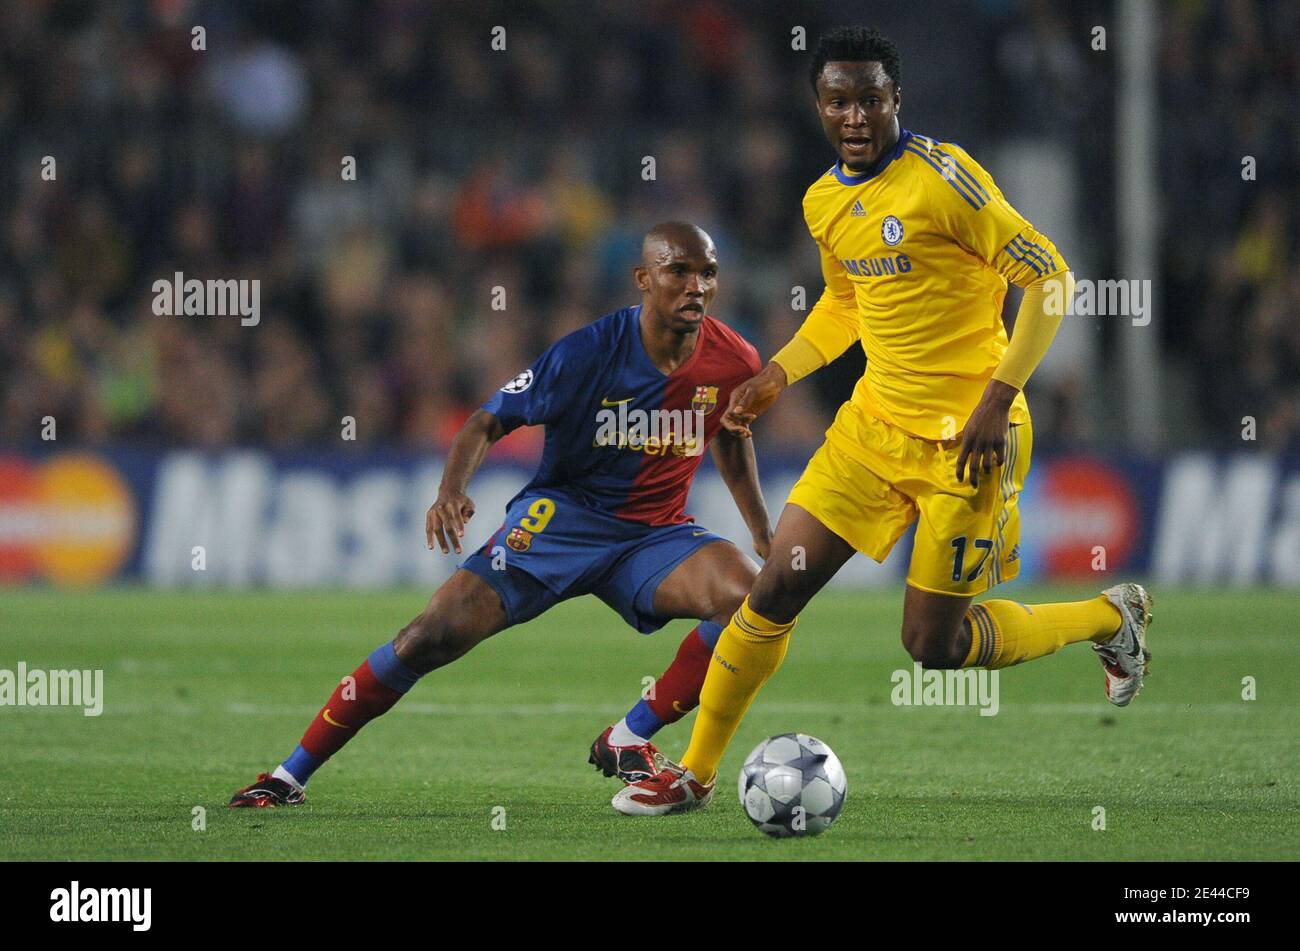 FC Barcelona's Samuel Eto'o is challenged by Chelsea's John Mikel Obi during the UEFA Champions League, Semi Final, First Leg, Barcelona vs Chelsea at the Nou Camp stadium in Barcelona, Spain on April 28, 2009. The match ended in a 20-0 draw. Photo by Steeve McMay/ABACAPRESS.COM Stock Photo